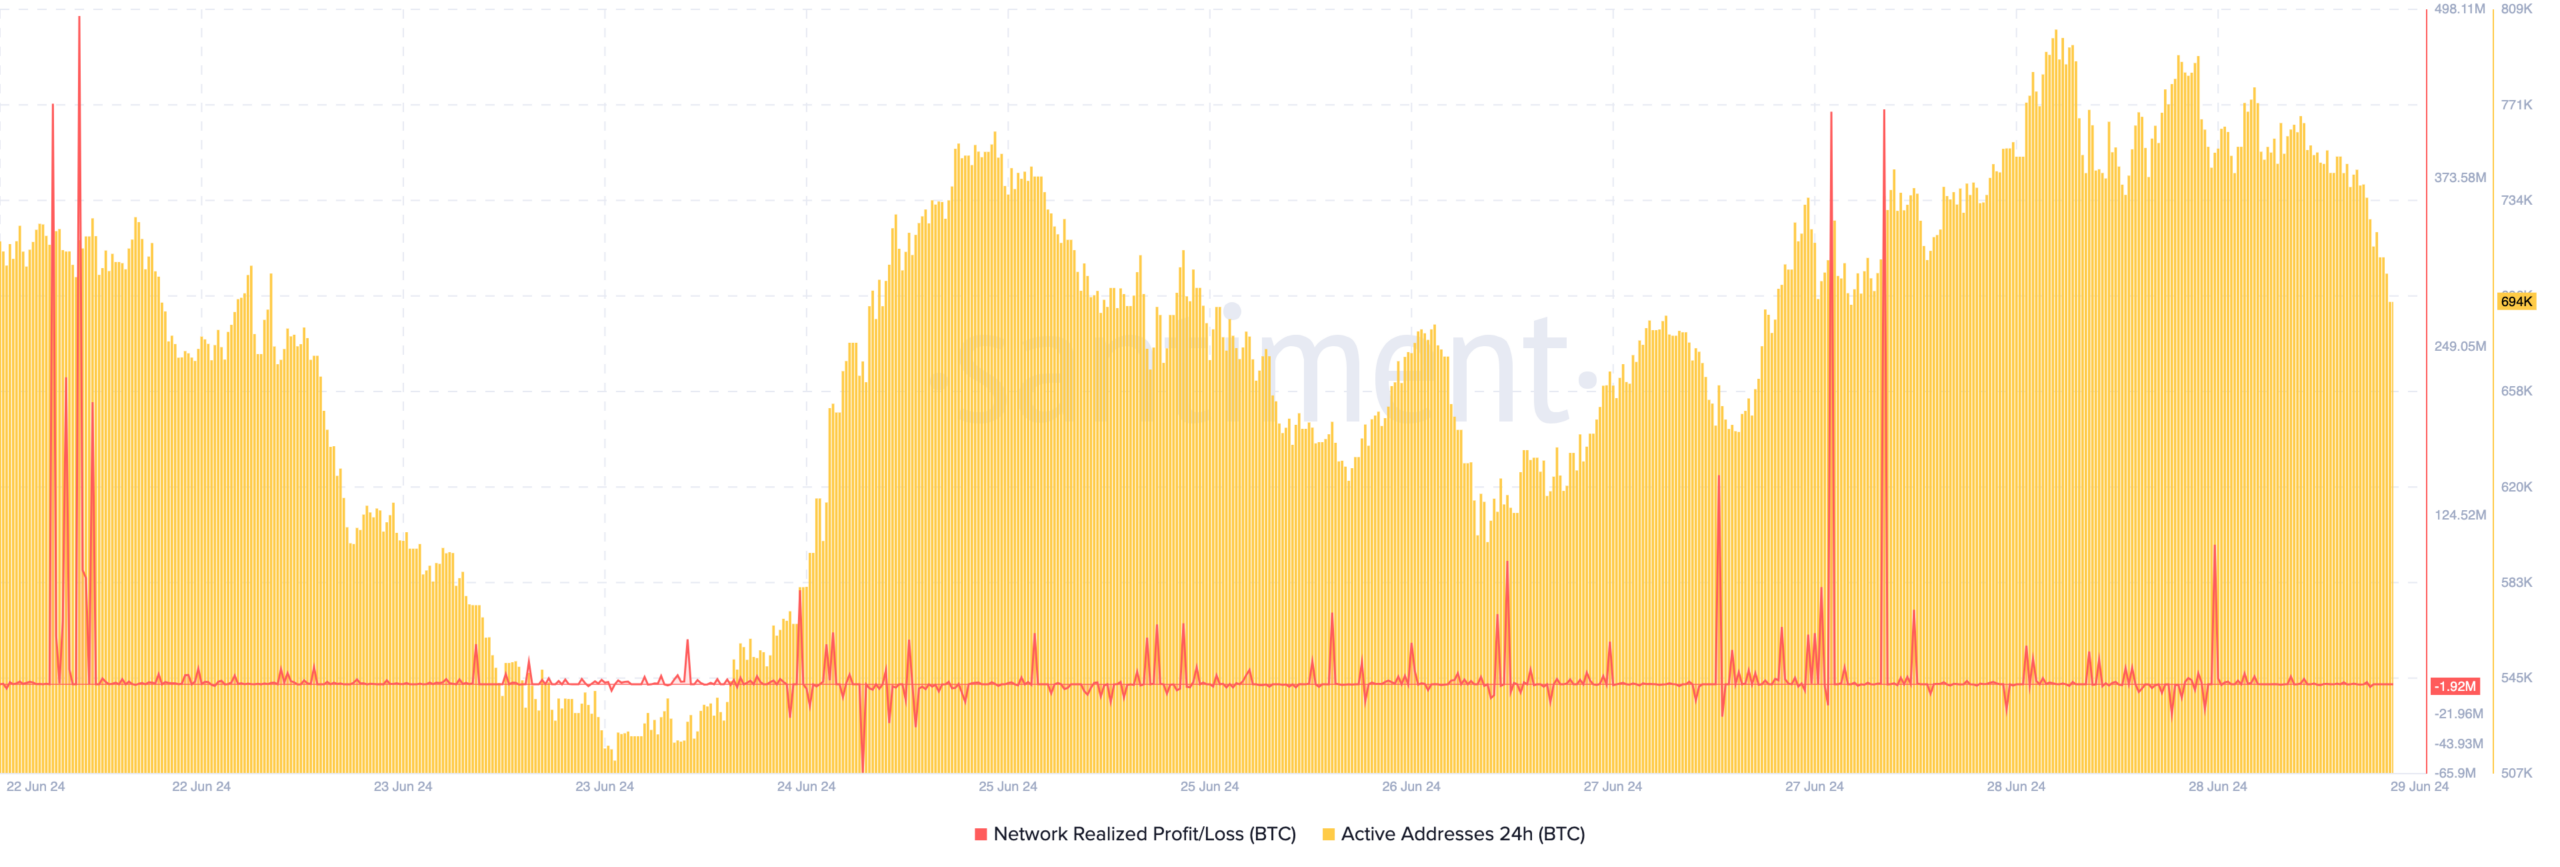 Bitcoin network activity is declining